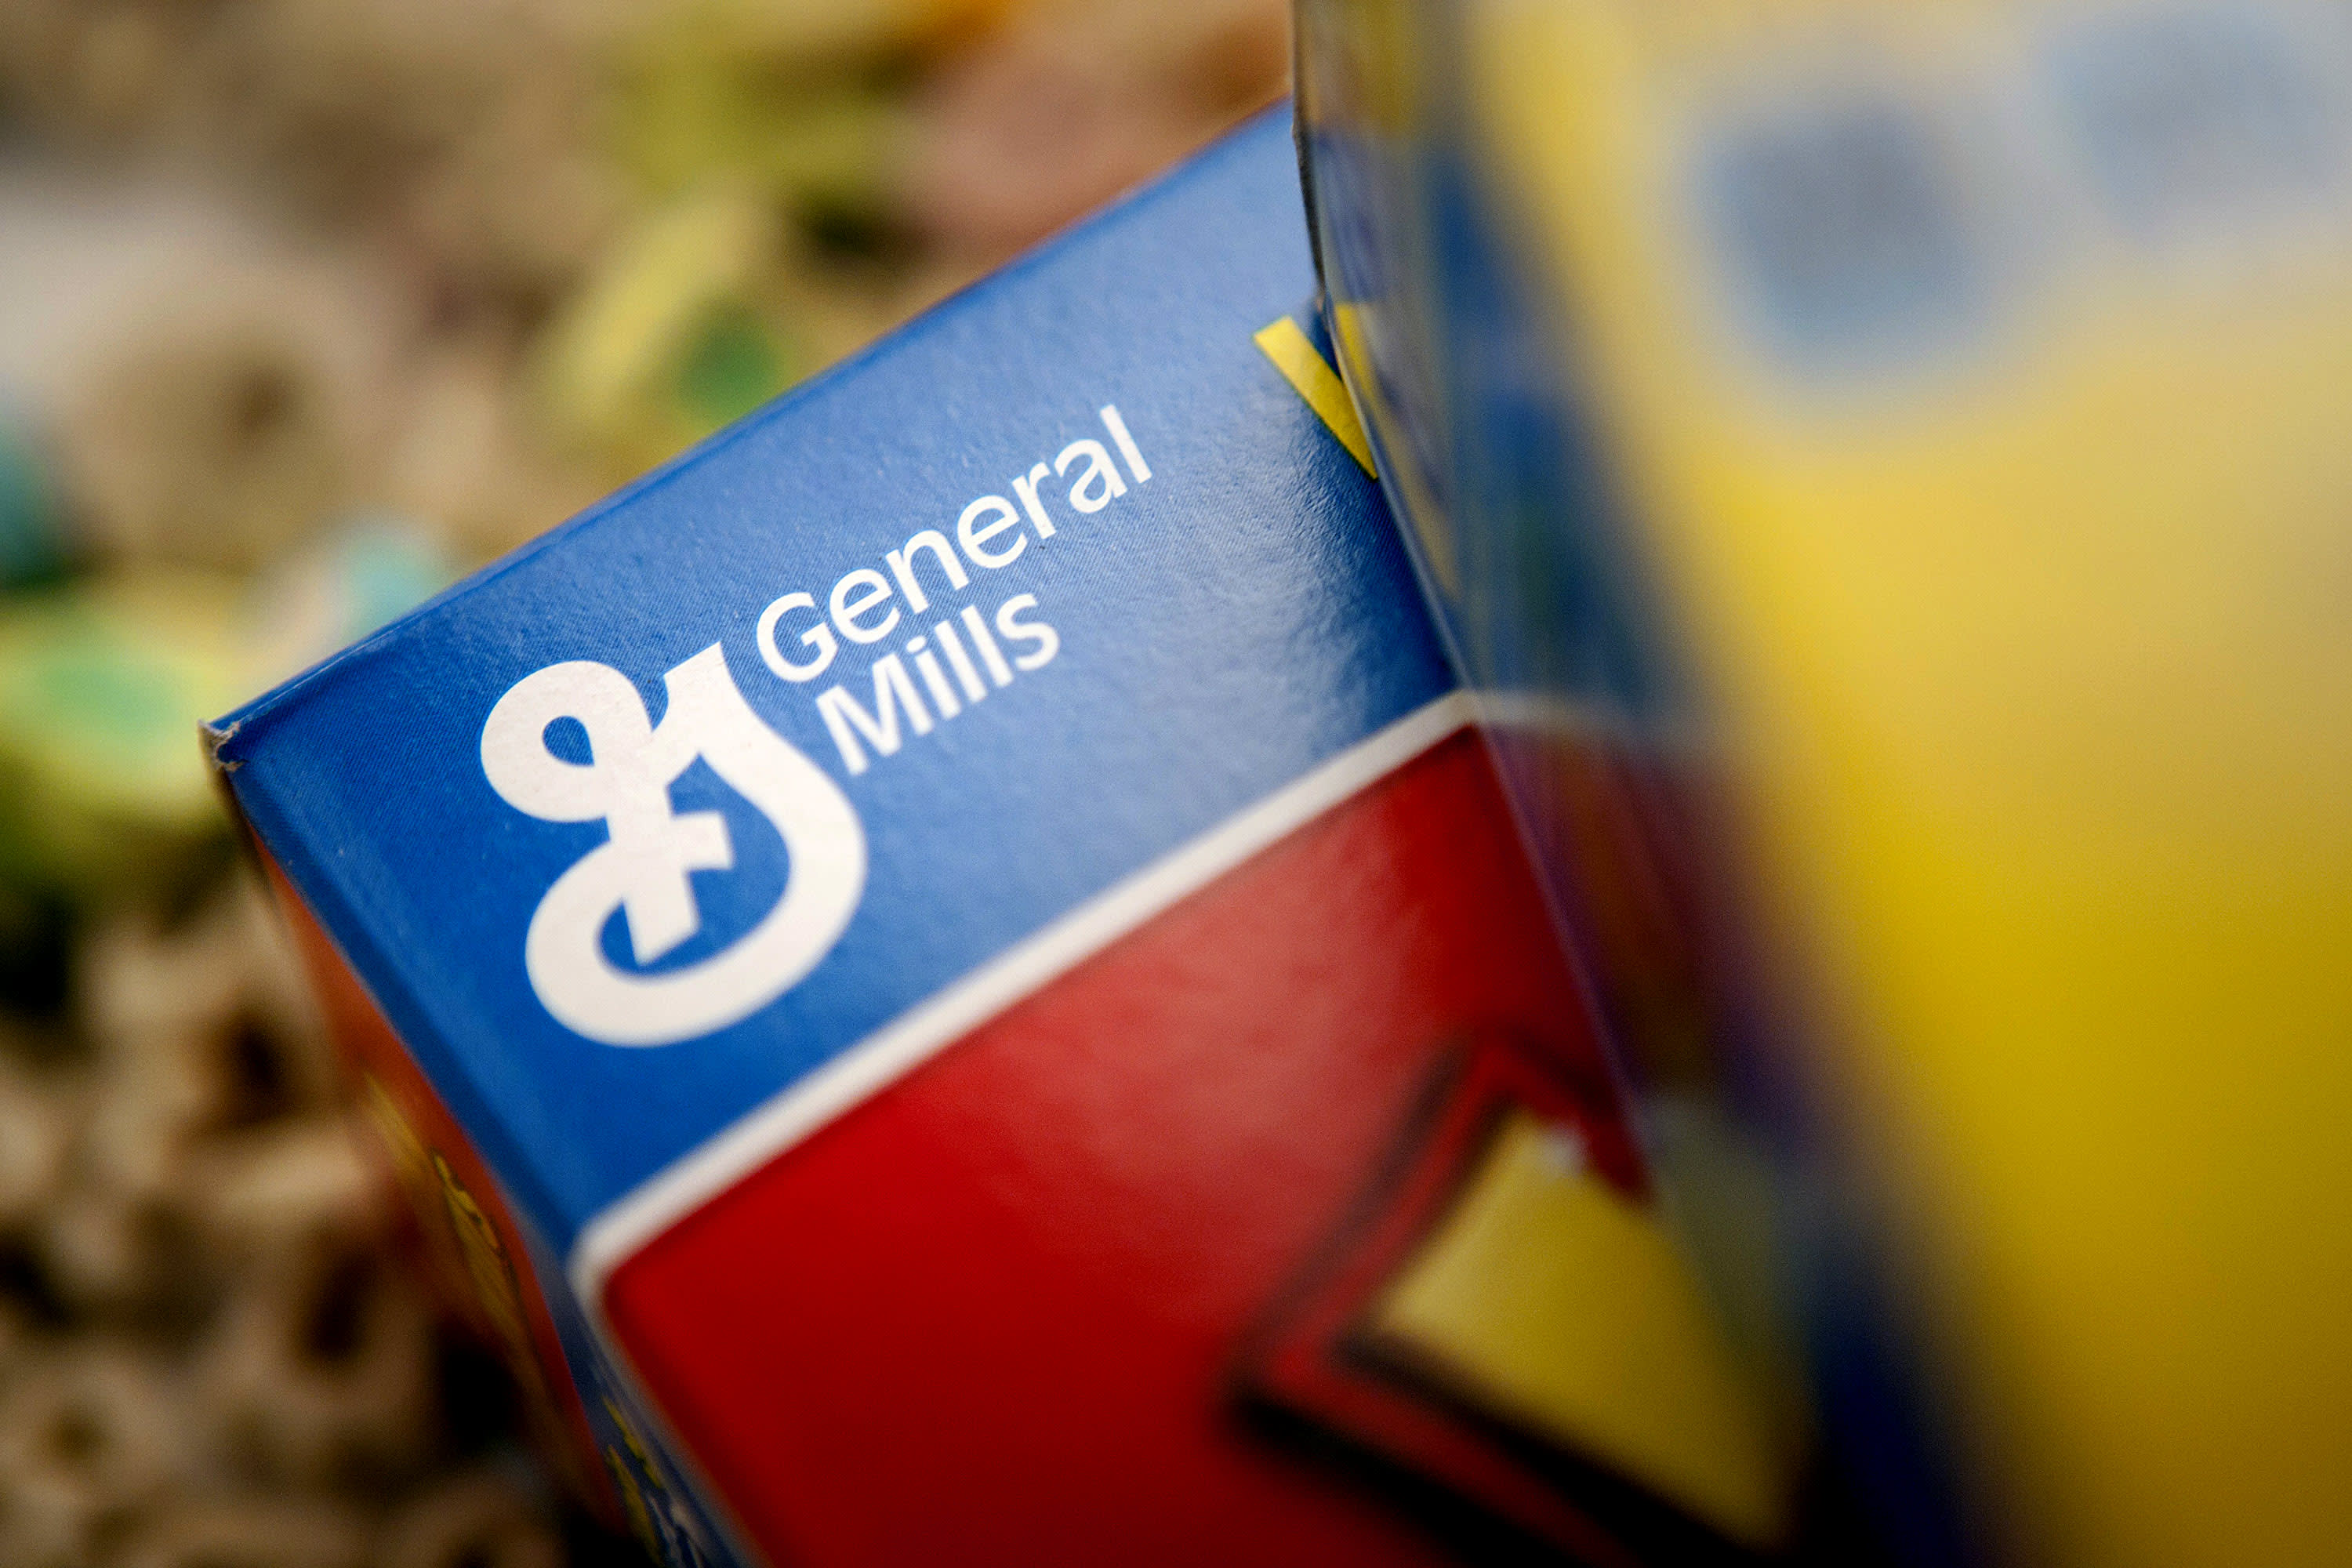 General Mills upgraded to buy at UBS after recent underperformance creates attractive entry point